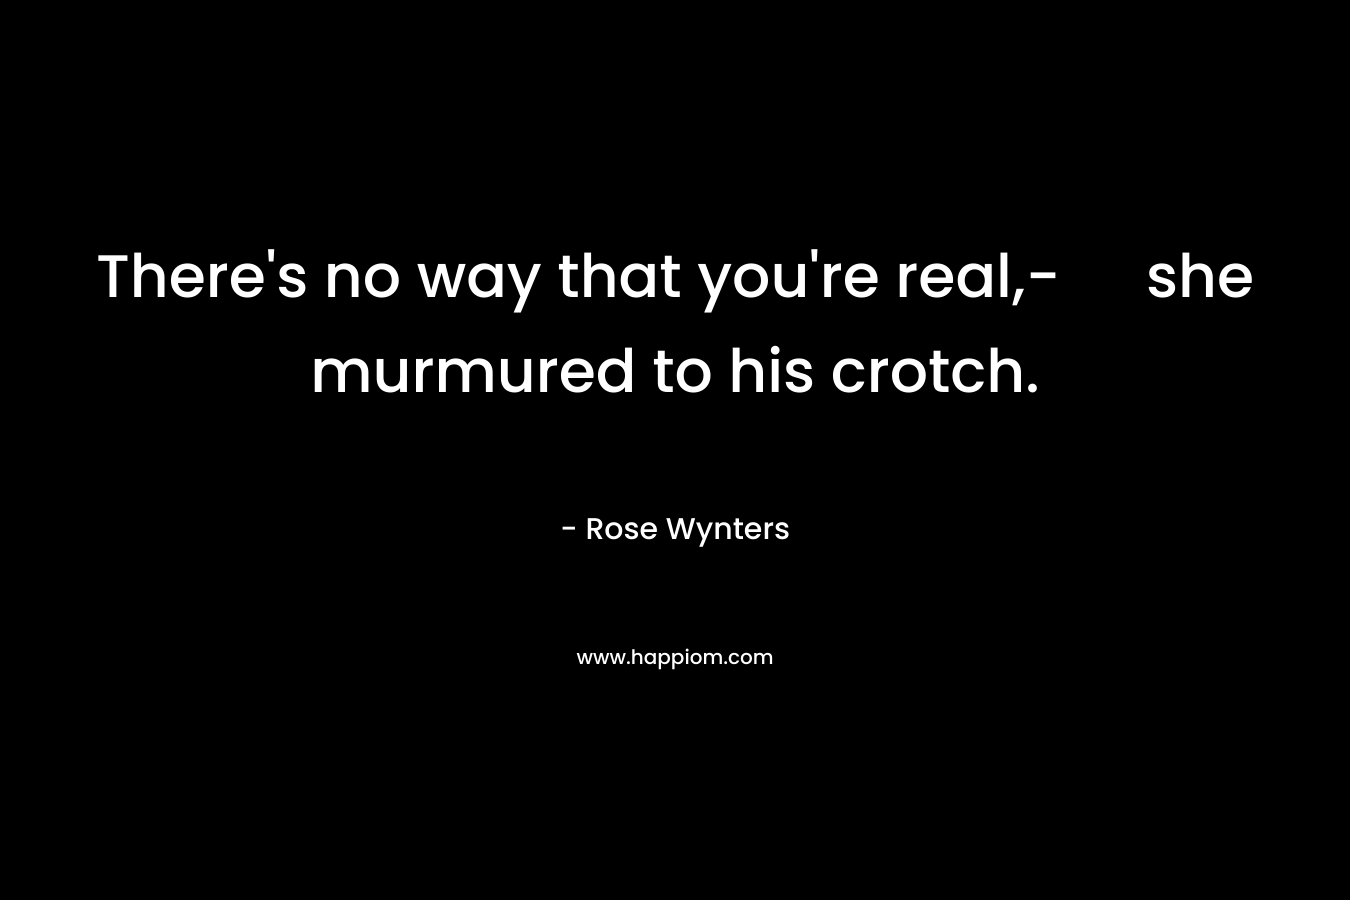 There's no way that you're real,- she murmured to his crotch.